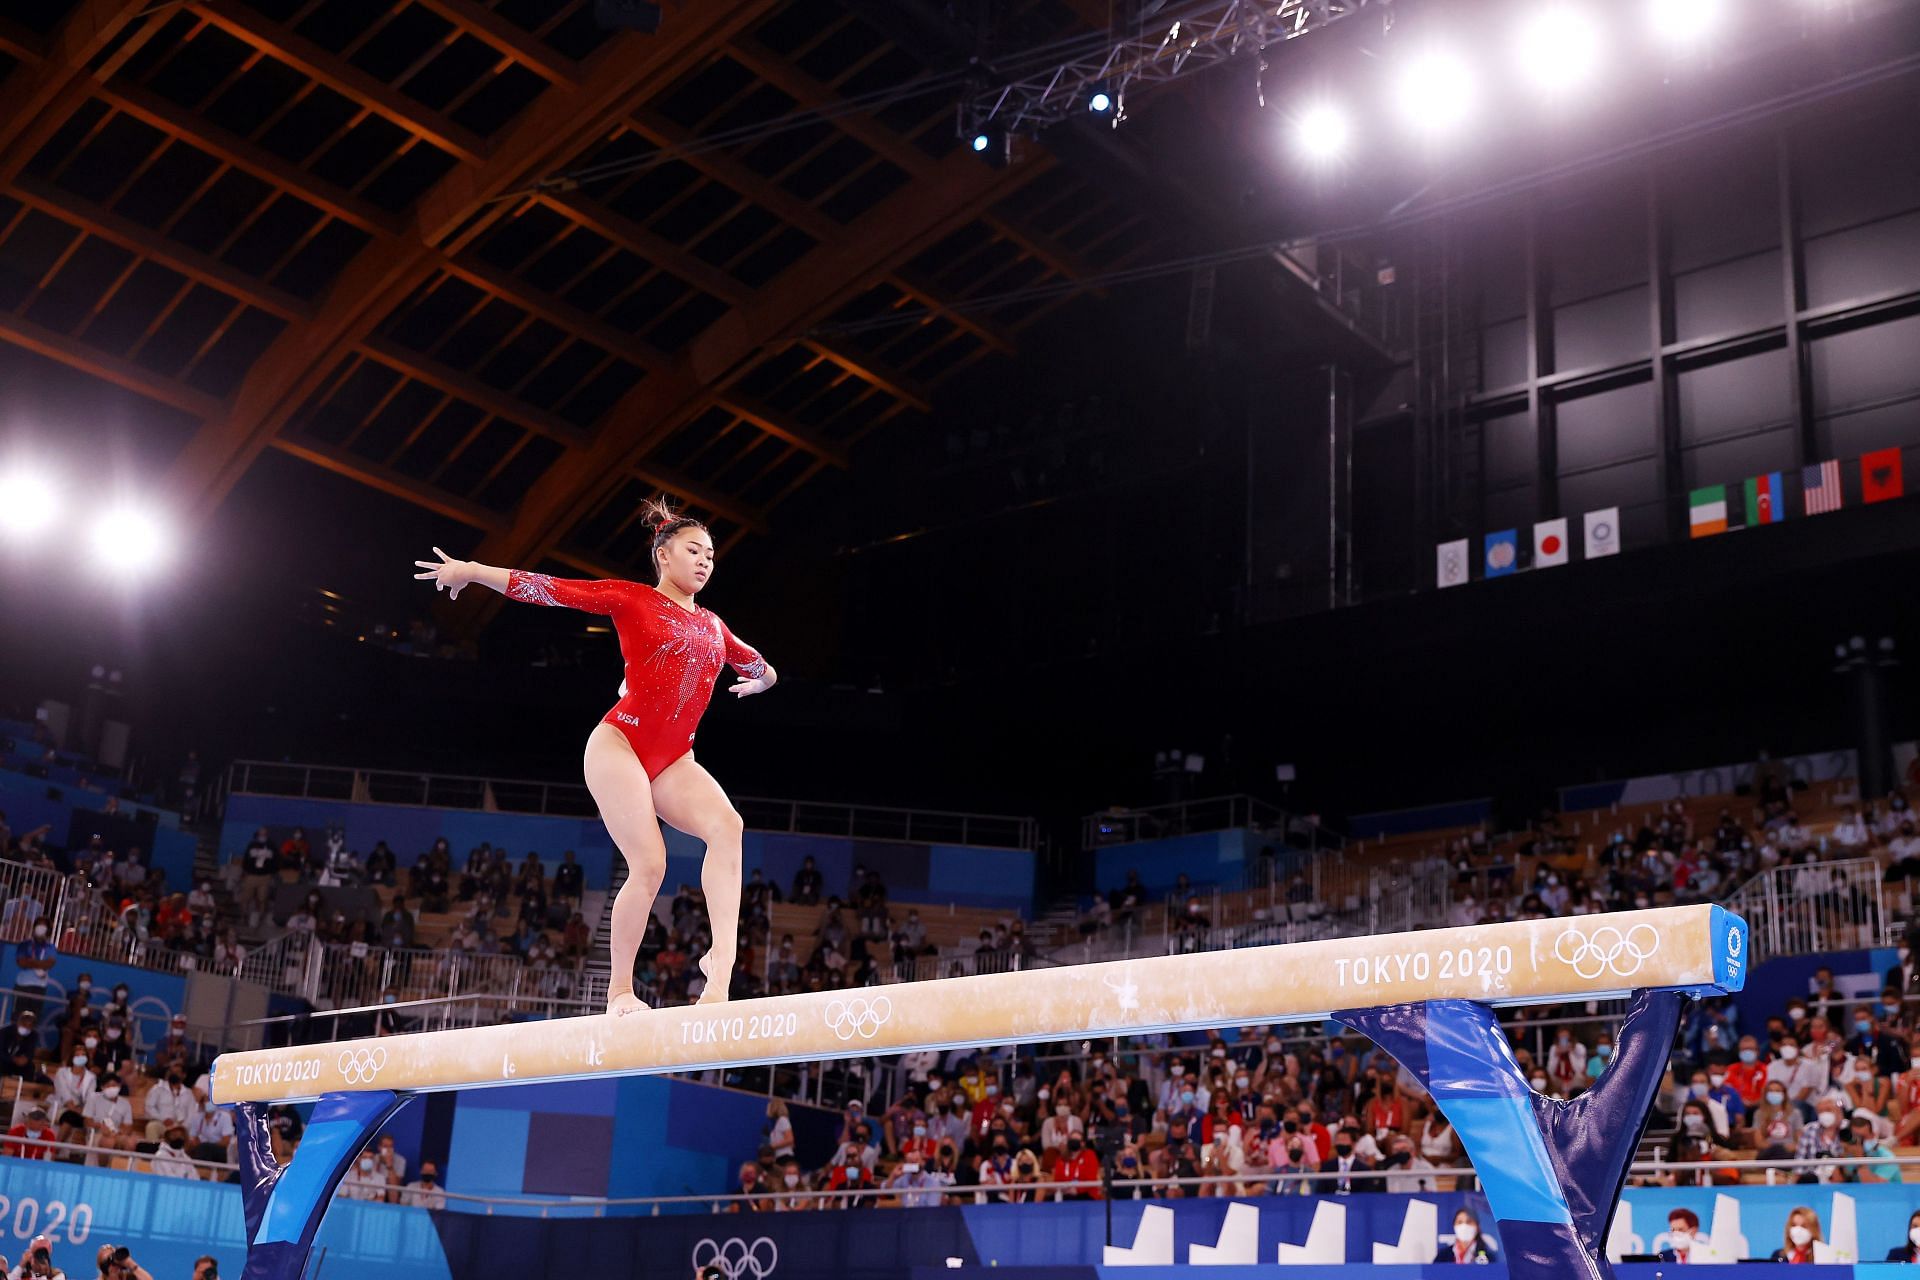 Suni Lee at the 2020 Olympics in Tokyo